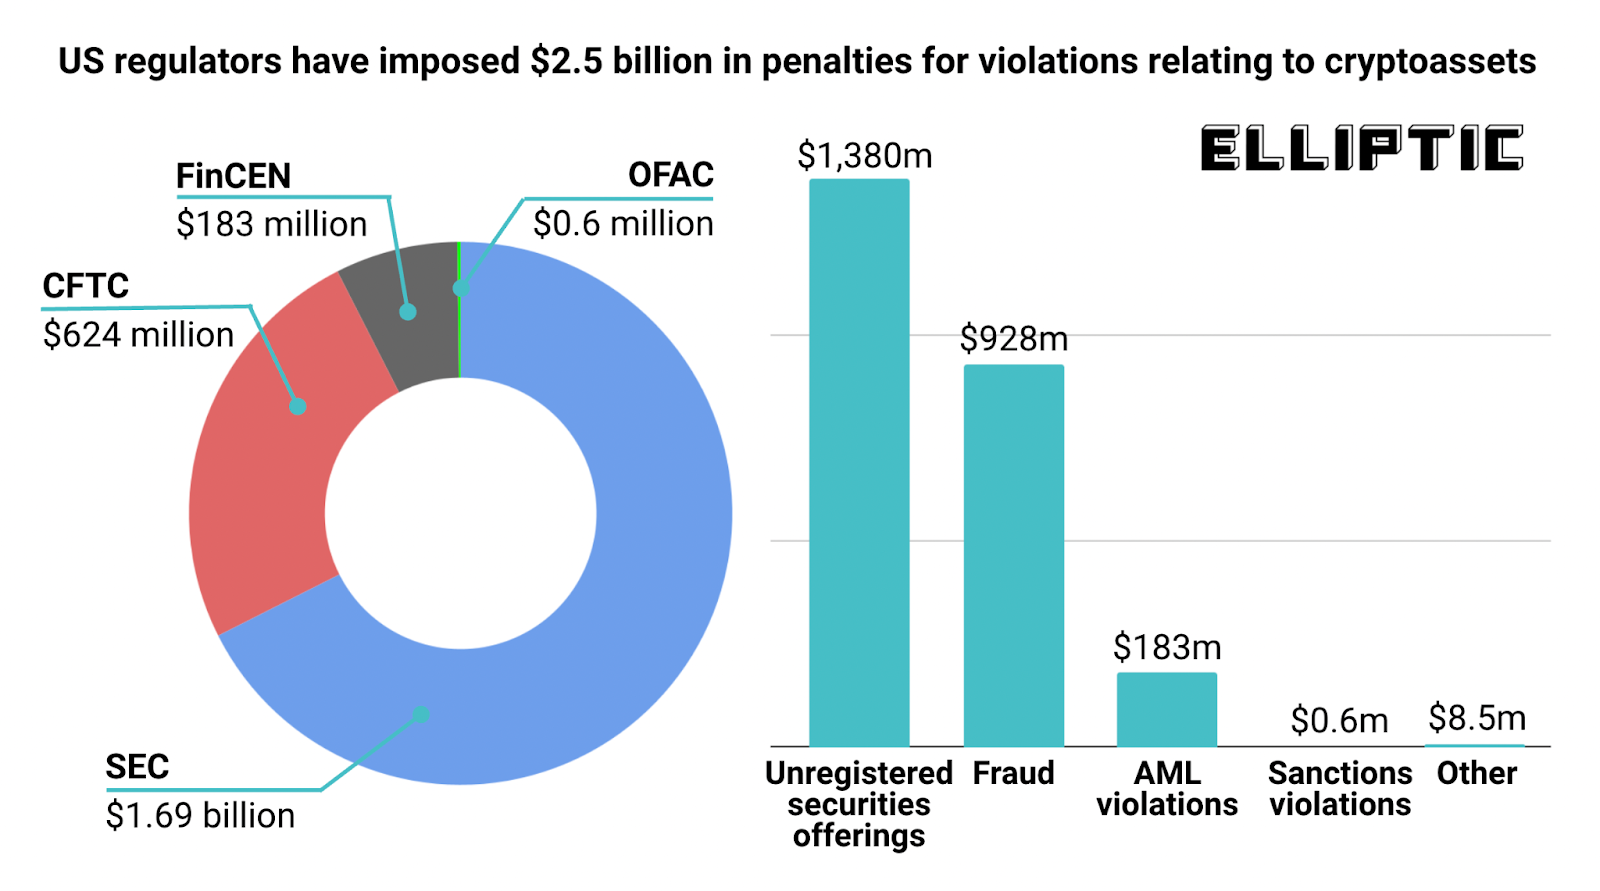 US Regulators Have Imposed $2.5 Billion Penalties on Crypto Firms and Individuals